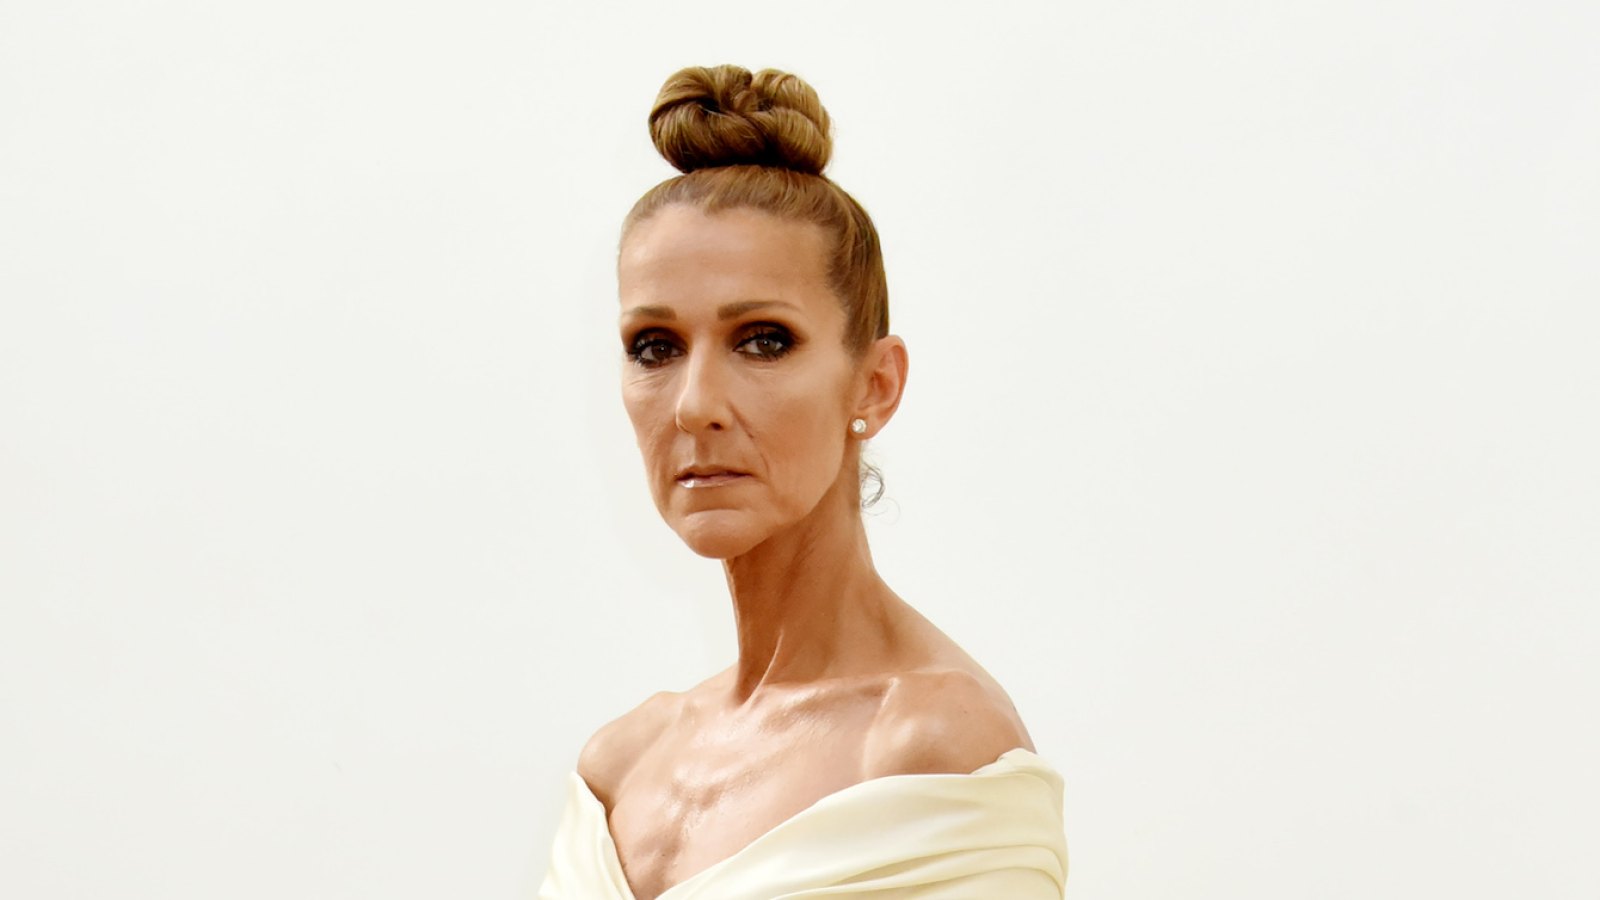 Celine Dion s Sister Says She Doesn t Have Control of Muscles as She Battles Stiff Person Syndrome